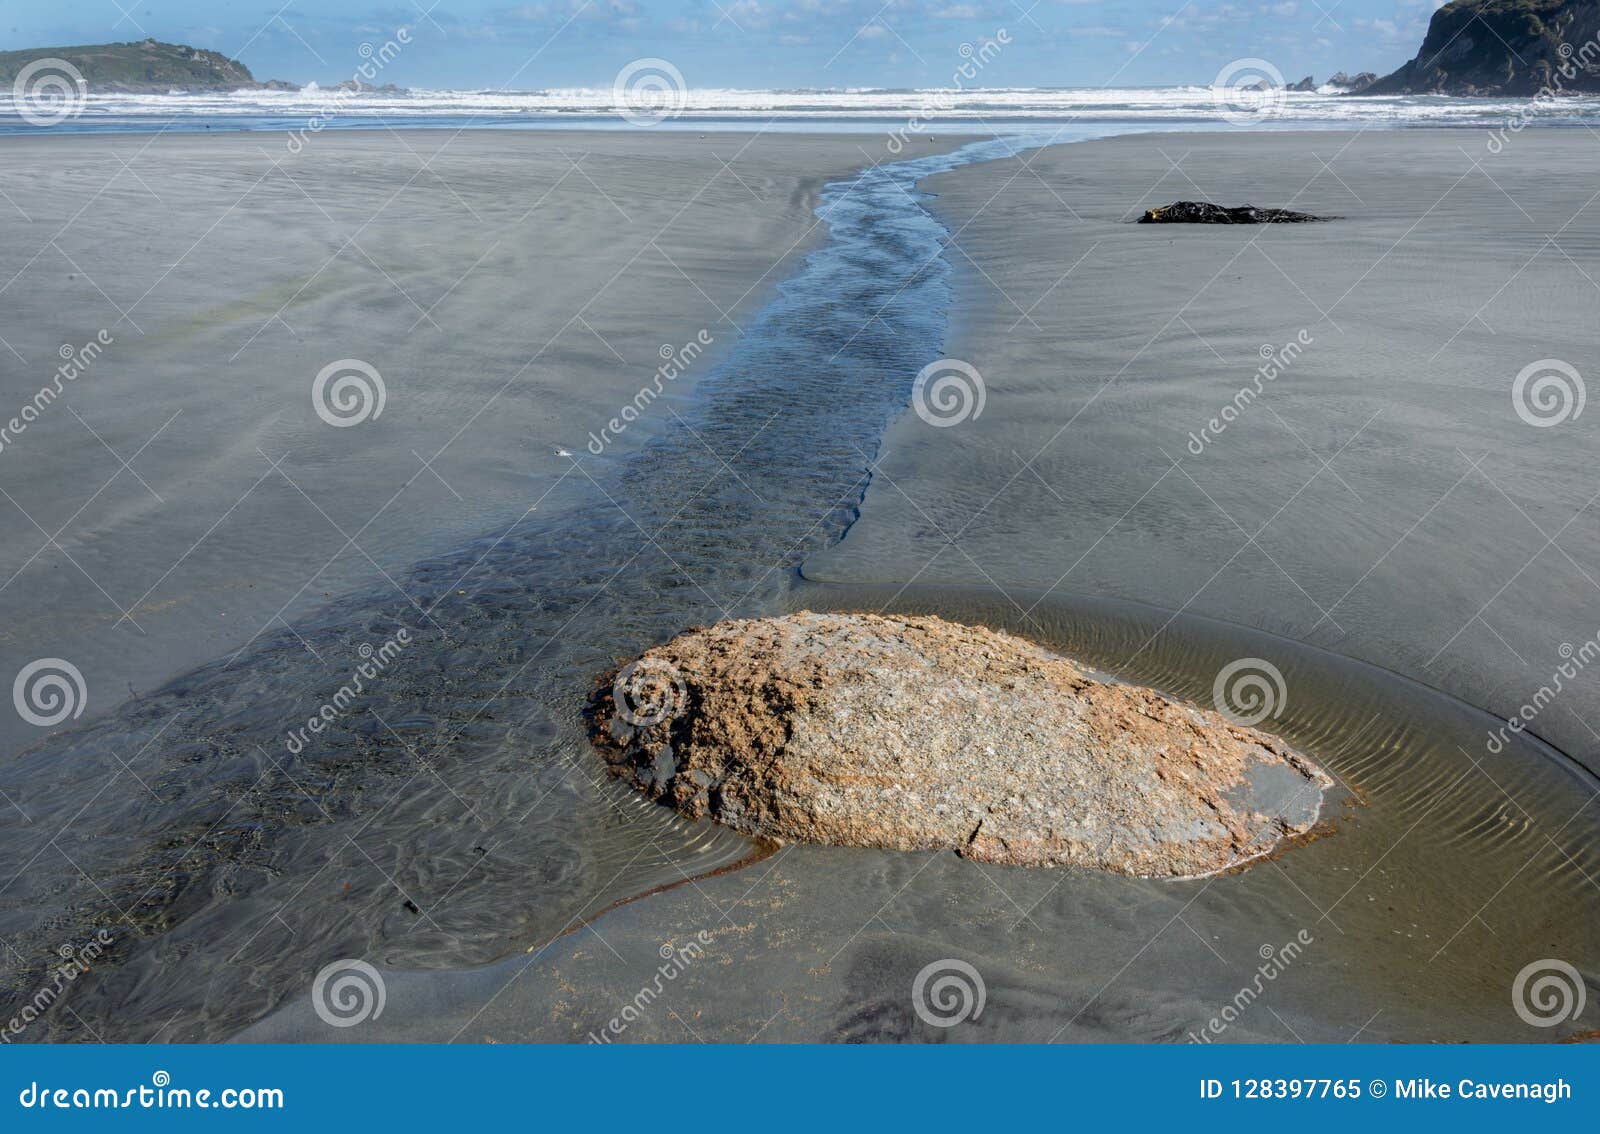 small stream flowing past exposed stone on deserted unspoiled beach